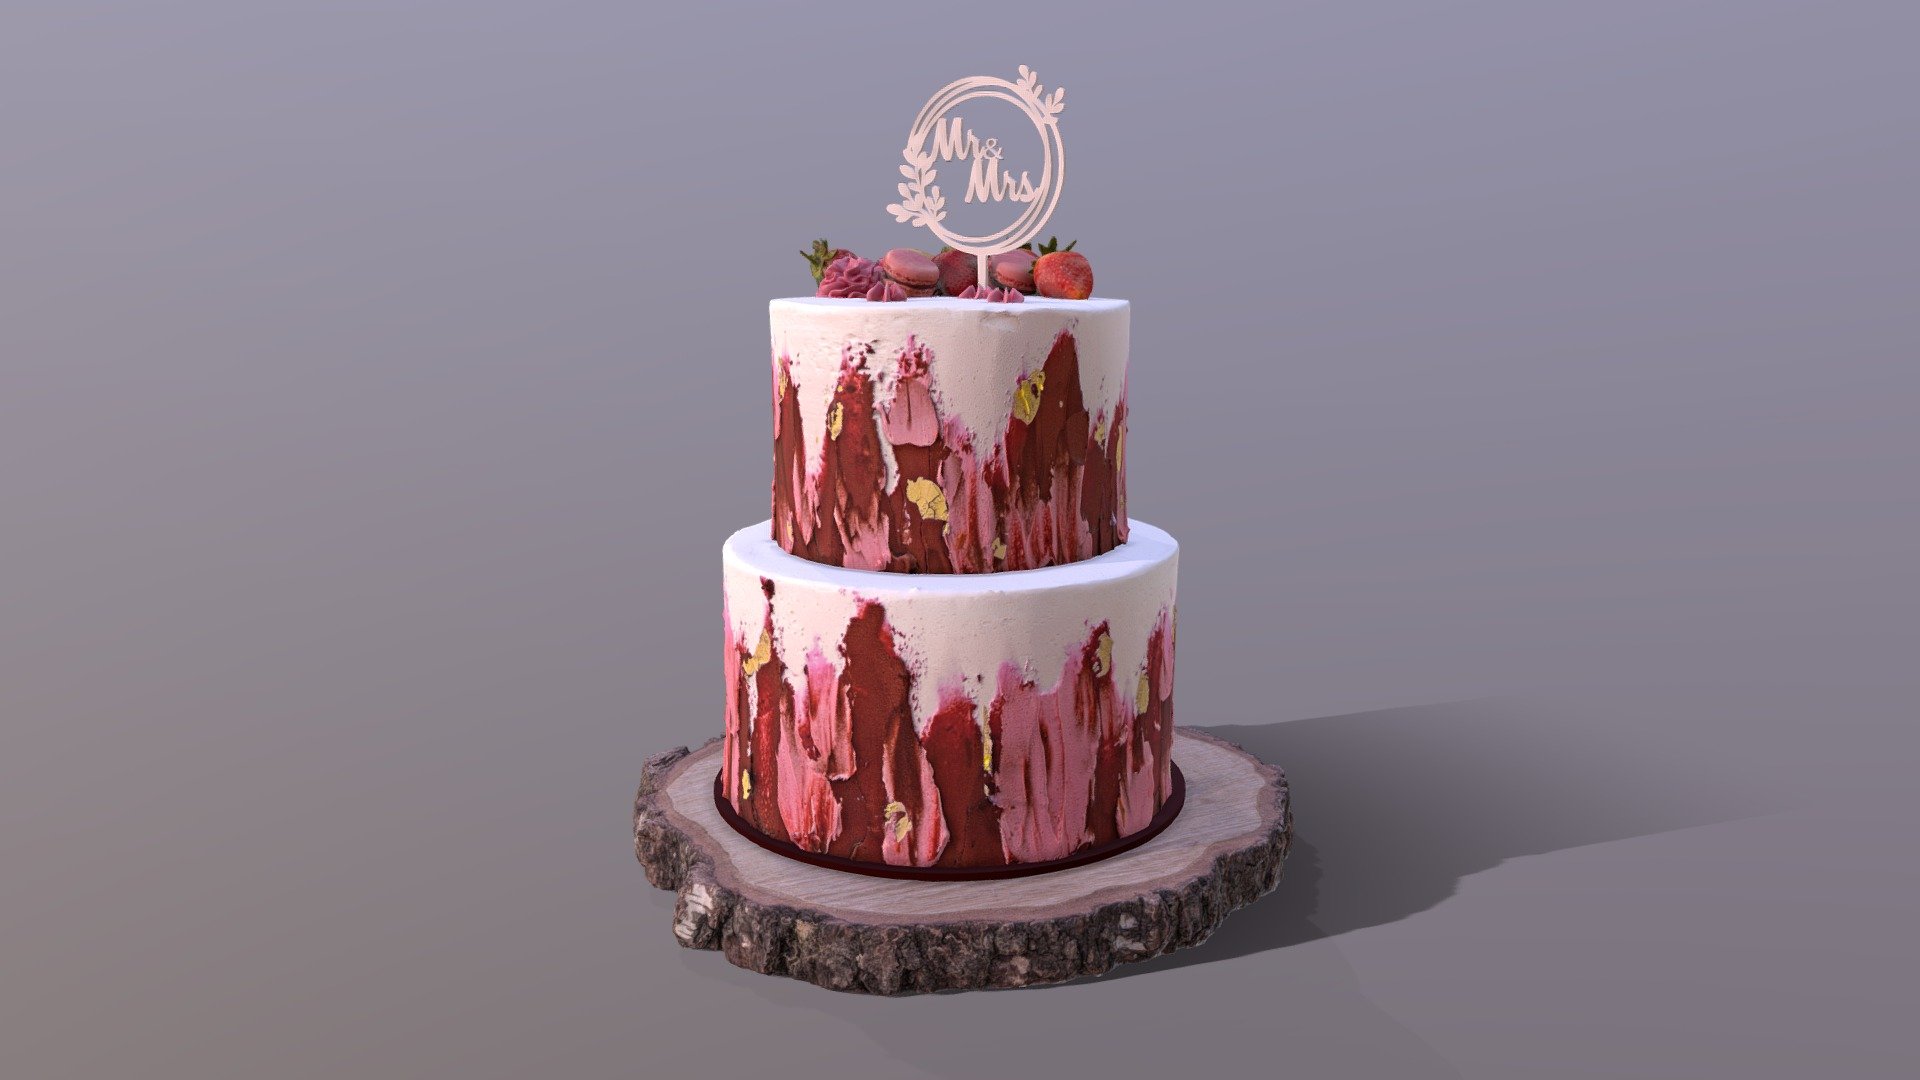 3D scan of an elegant Strawberry Swirl Wedding Cake on the Mosser glass stand which is made by CAKESBURG Online Premium Cake Shop in UK. 




Cake Textures 2X 4096*4096px PBR photoscan-based materials (Base Color, Normal, Roughness, Specular, AO)

Wooden Log Slice Textures 4096*4096px PBR photoscan-based materials (Base Color, Normal, Roughness, Specular, AO)

Mr&amp;Mrs Cake Topper has material
 - Elegant Berry Wedding Cake - Buy Royalty Free 3D model by Cakesburg Premium 3D Cake Shop (@Viscom_Cakesburg) 3d model